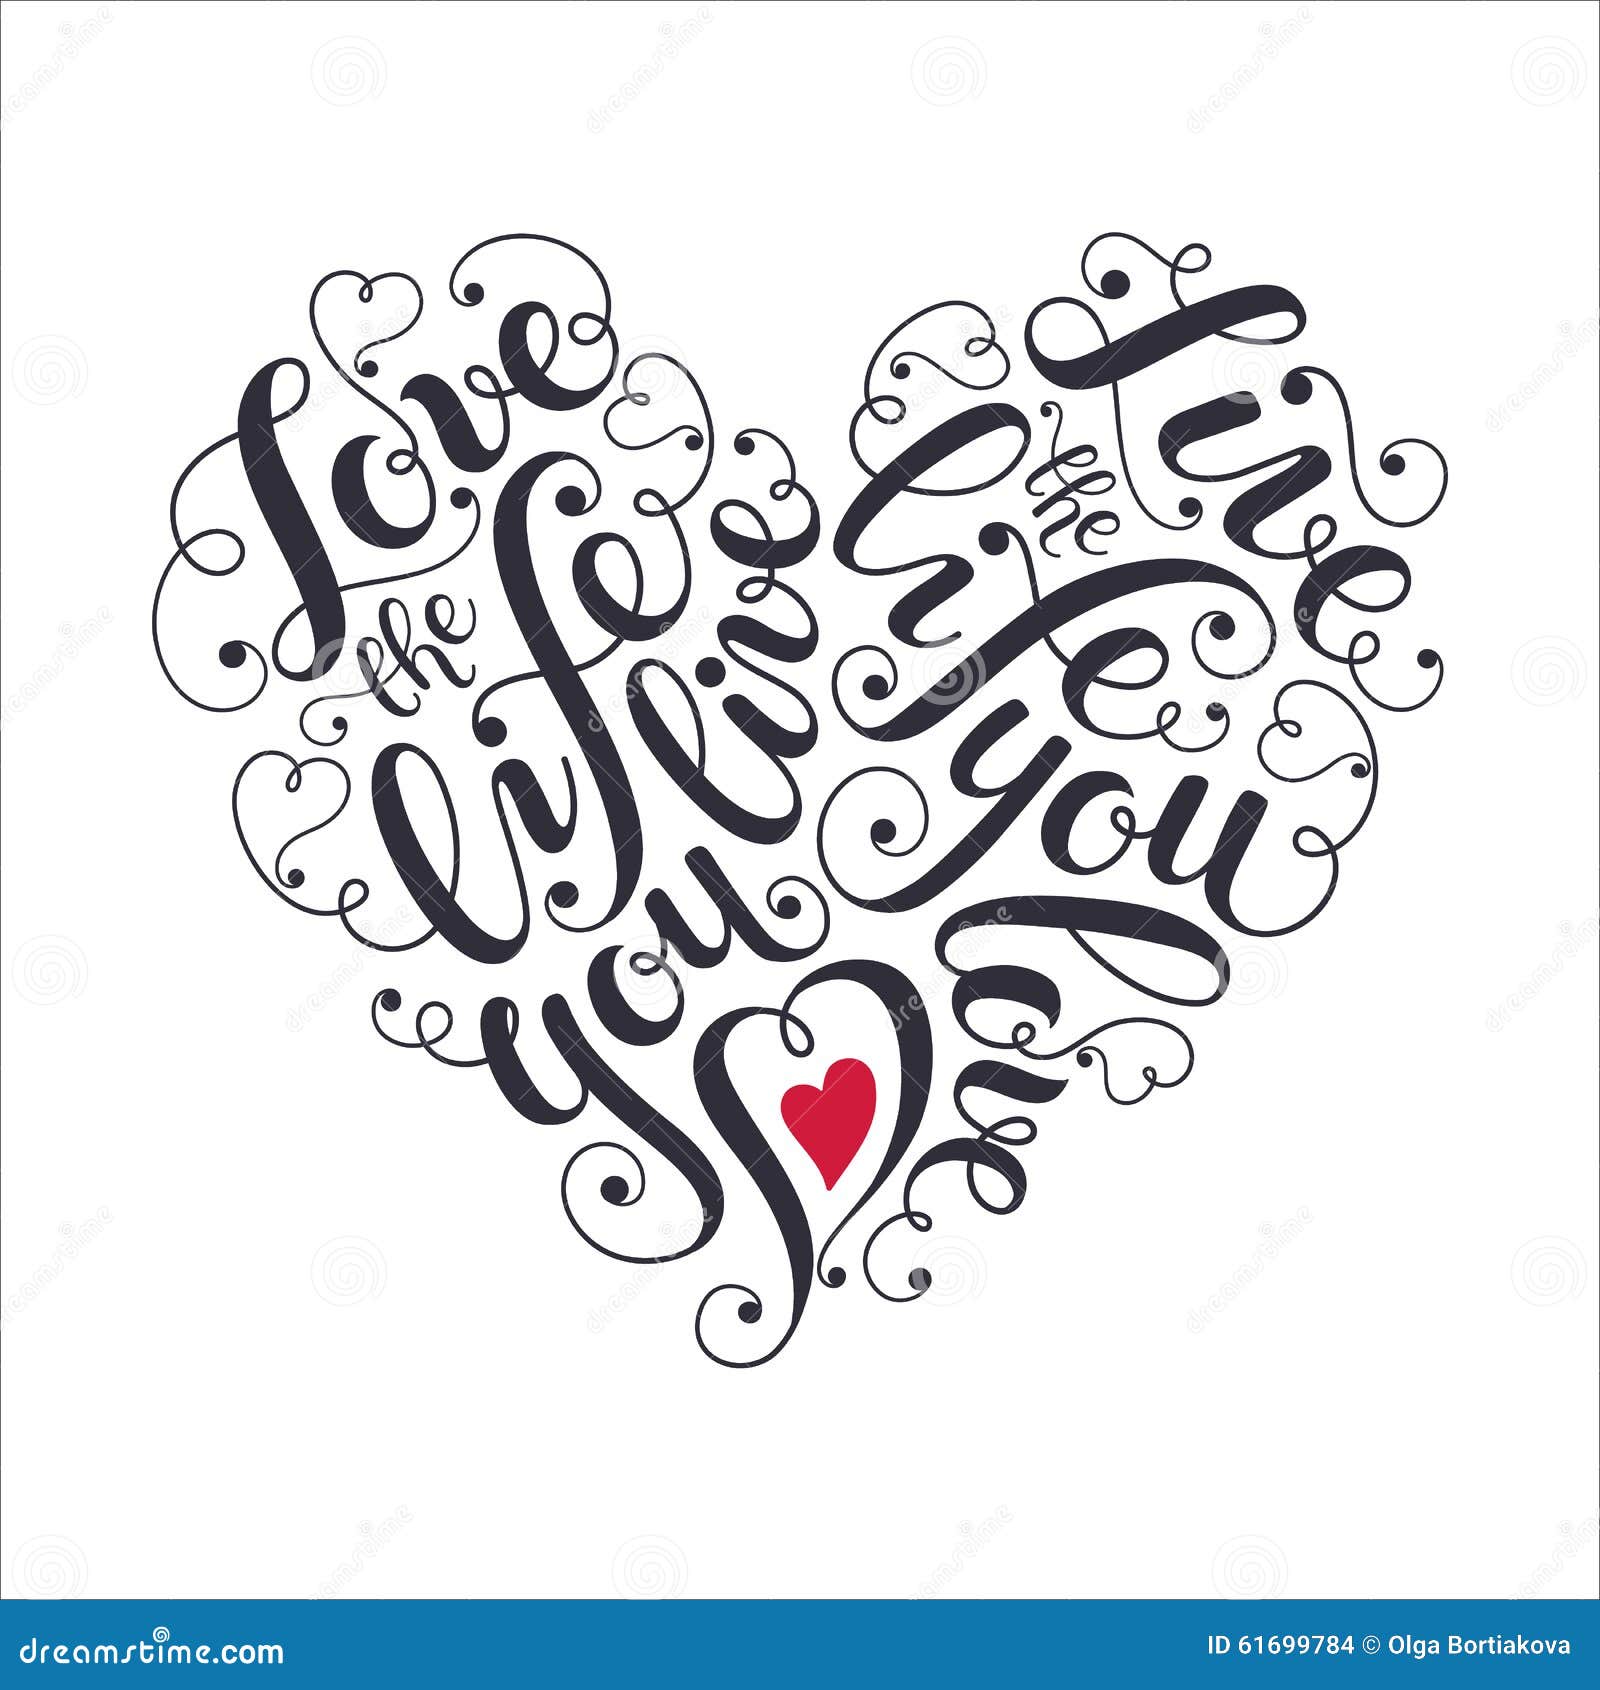 Download Inspiring Heart Shaped Poster Stock Vector - Image: 61699784